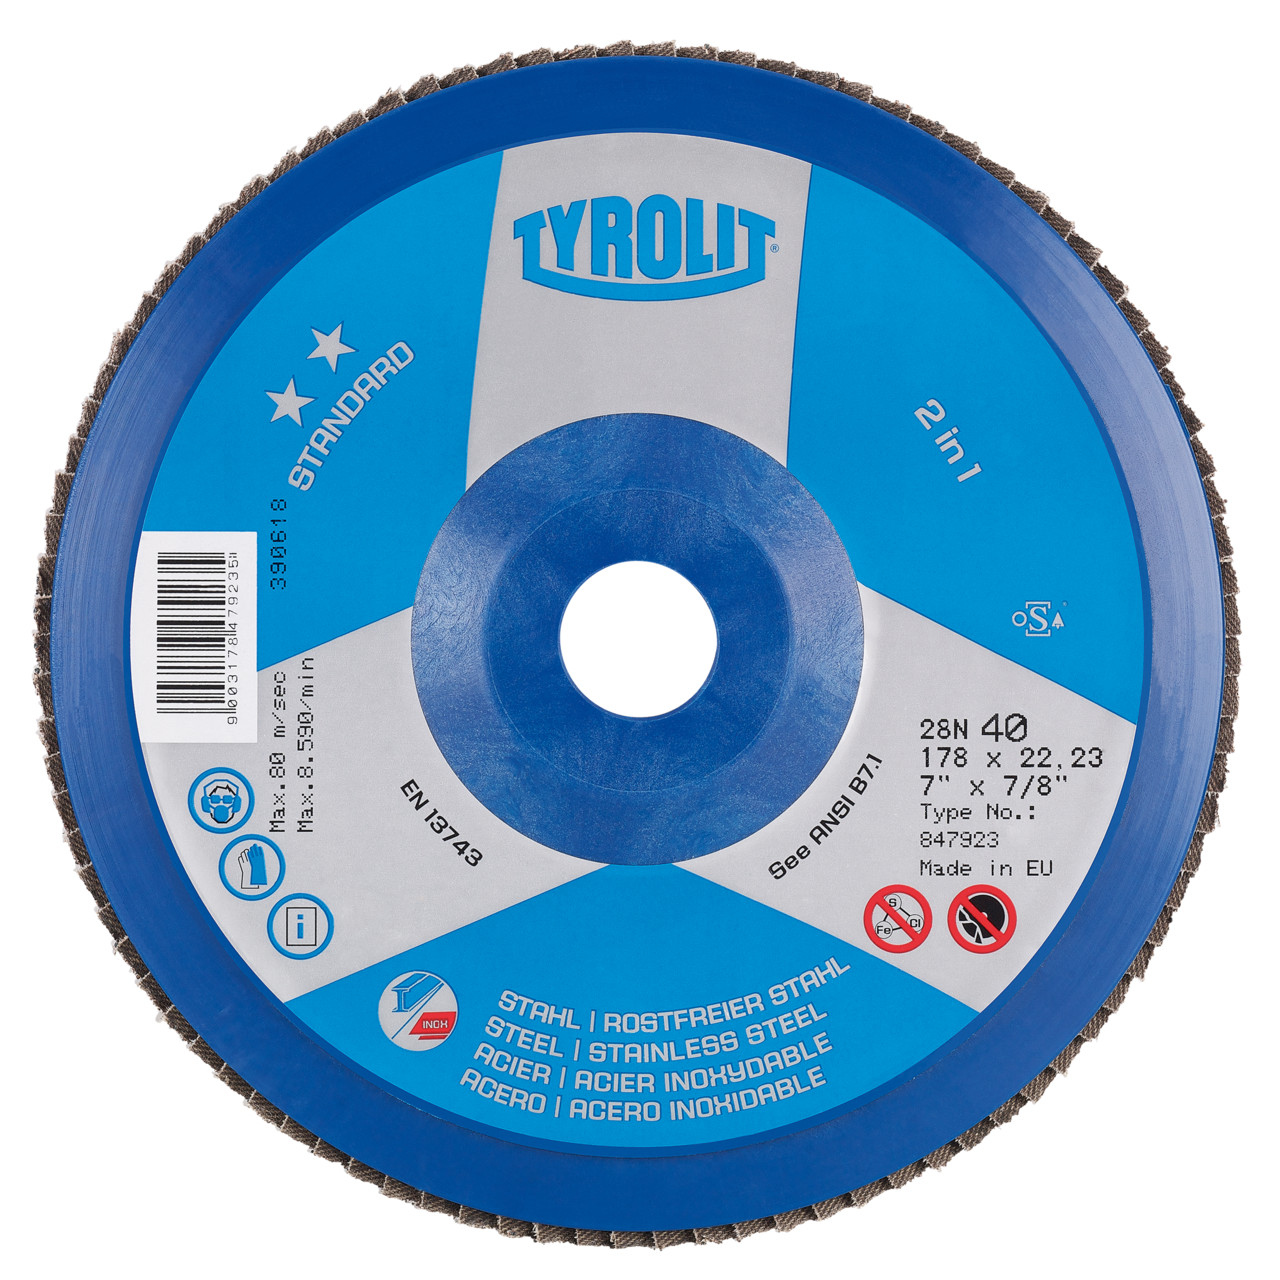 Tyrolit Serrated lock washer DxH 115x22.2 2in1 for steel and stainless steel, P60, shape: 28N - straight version (plastic carrier body), Art. 847924